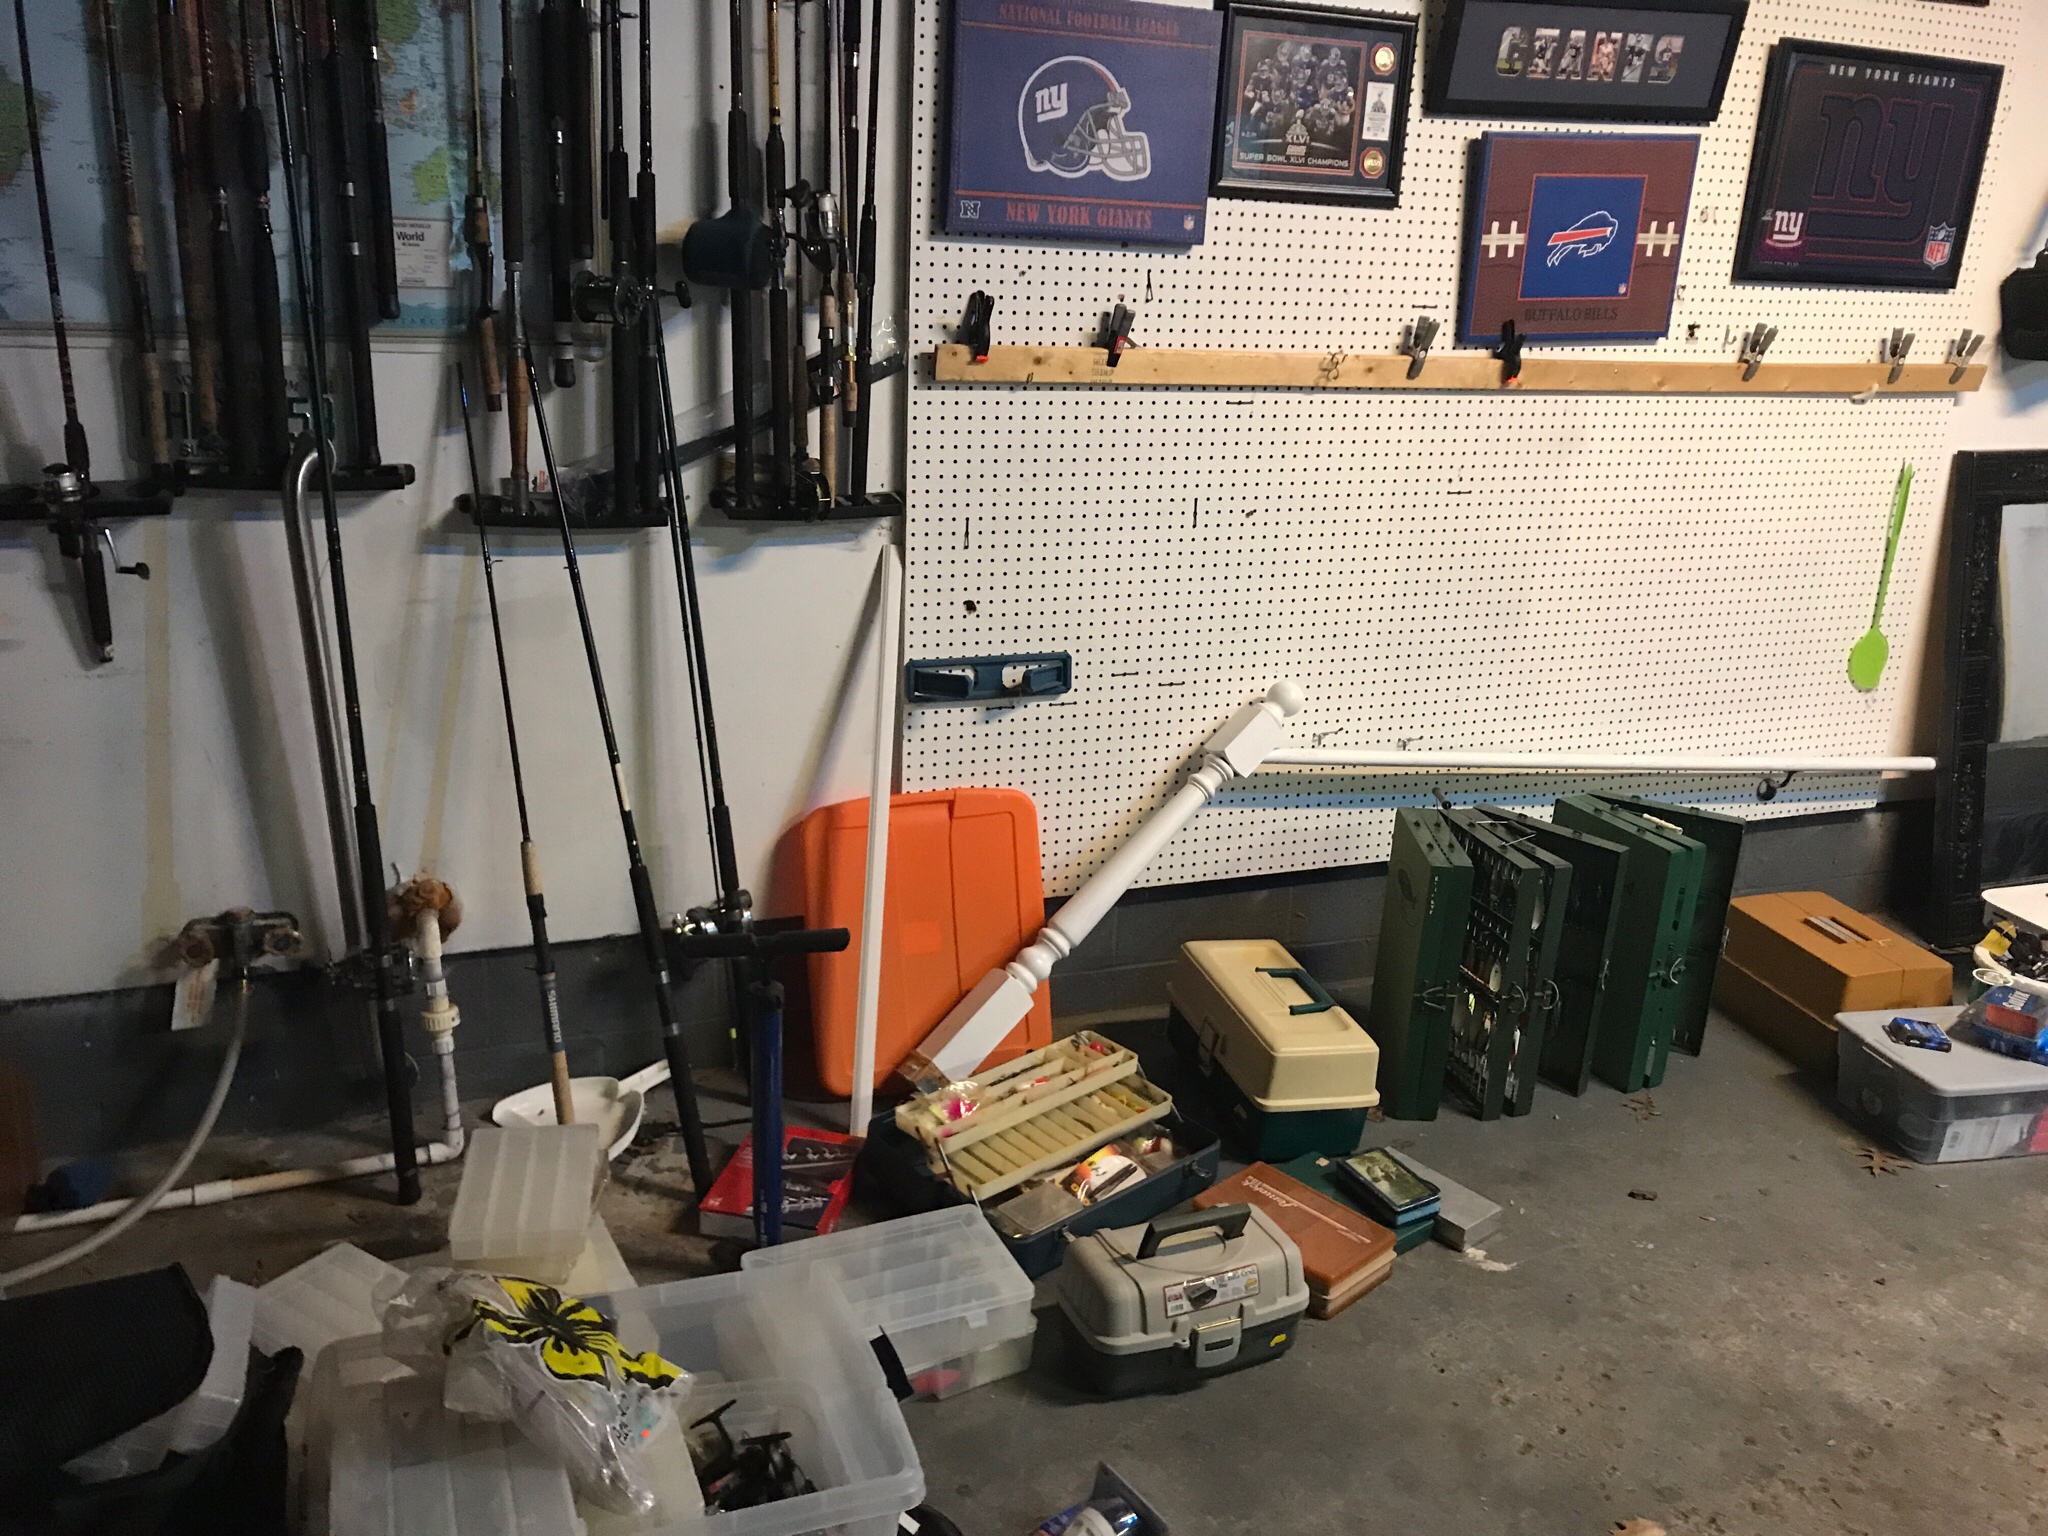 One day fishing garage sale April 27 Saturday rochester ny - Classifieds -  Buy, Sell, Trade or Rent - Lake Ontario United - Lake Ontario's Largest  Fishing & Hunting Community - New York and Ontario Canada